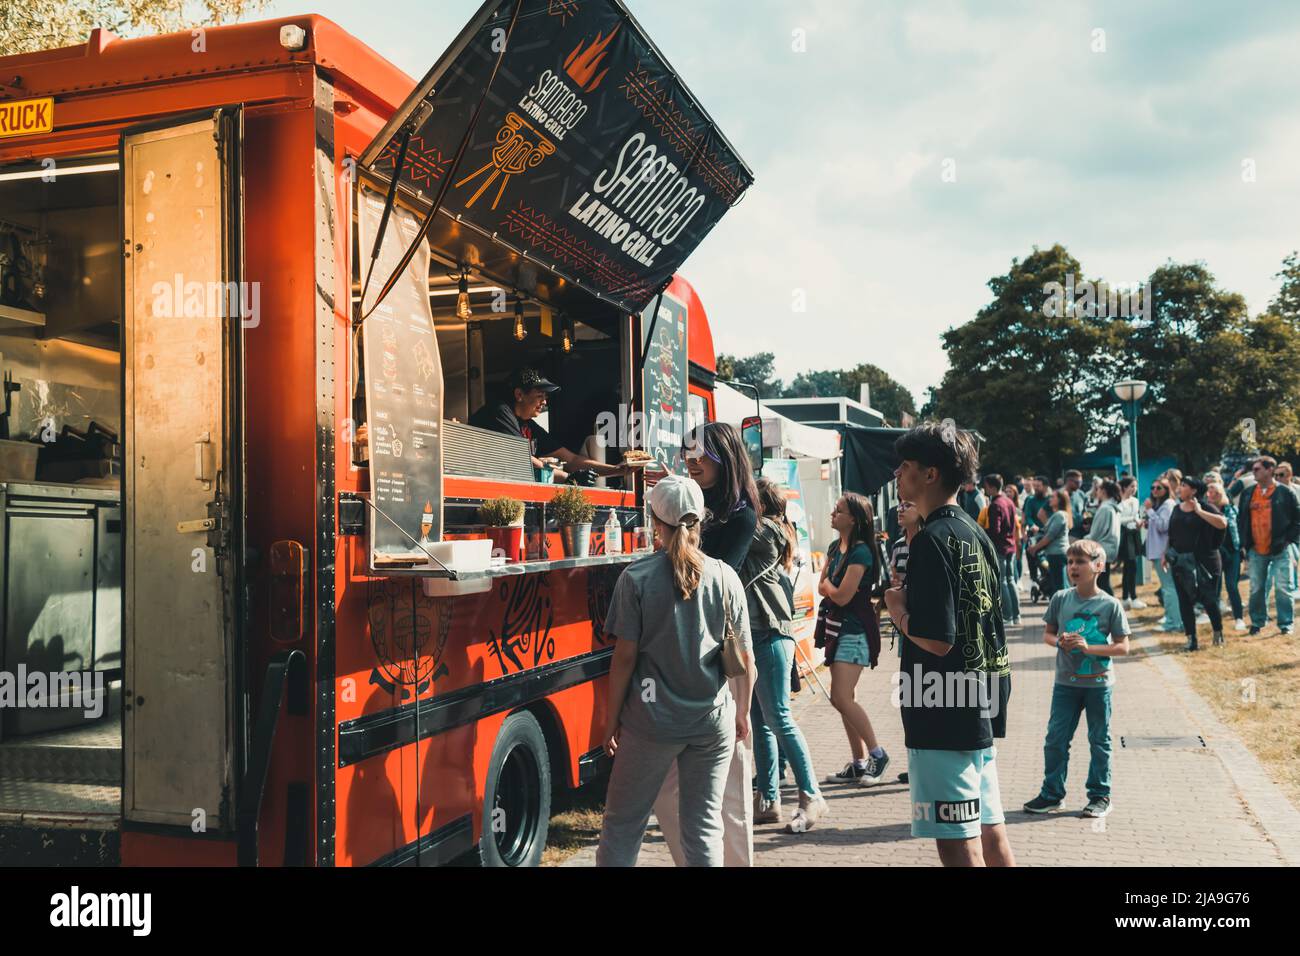 Hockenheim, Germany - May 28, 2022: Street food festival with food trucks  and people ordering international street food and fancy food Stock Photo -  Alamy